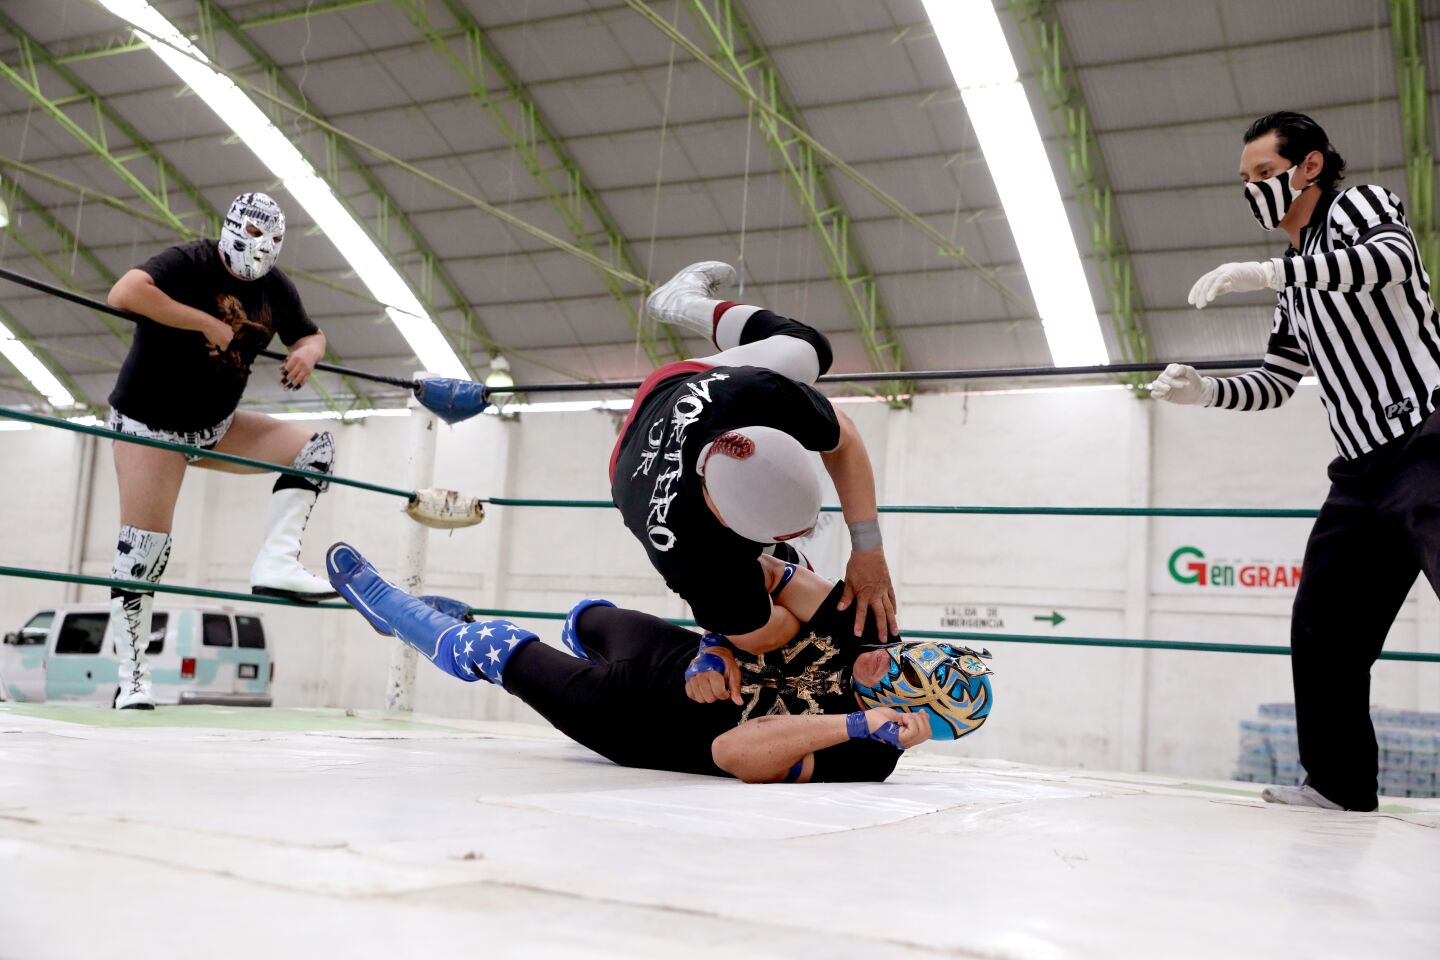 Referee Furcio keeps a close watch while wrestlers Tazosomok, from left, Mortero and Xtroh, on ground, battle it out.